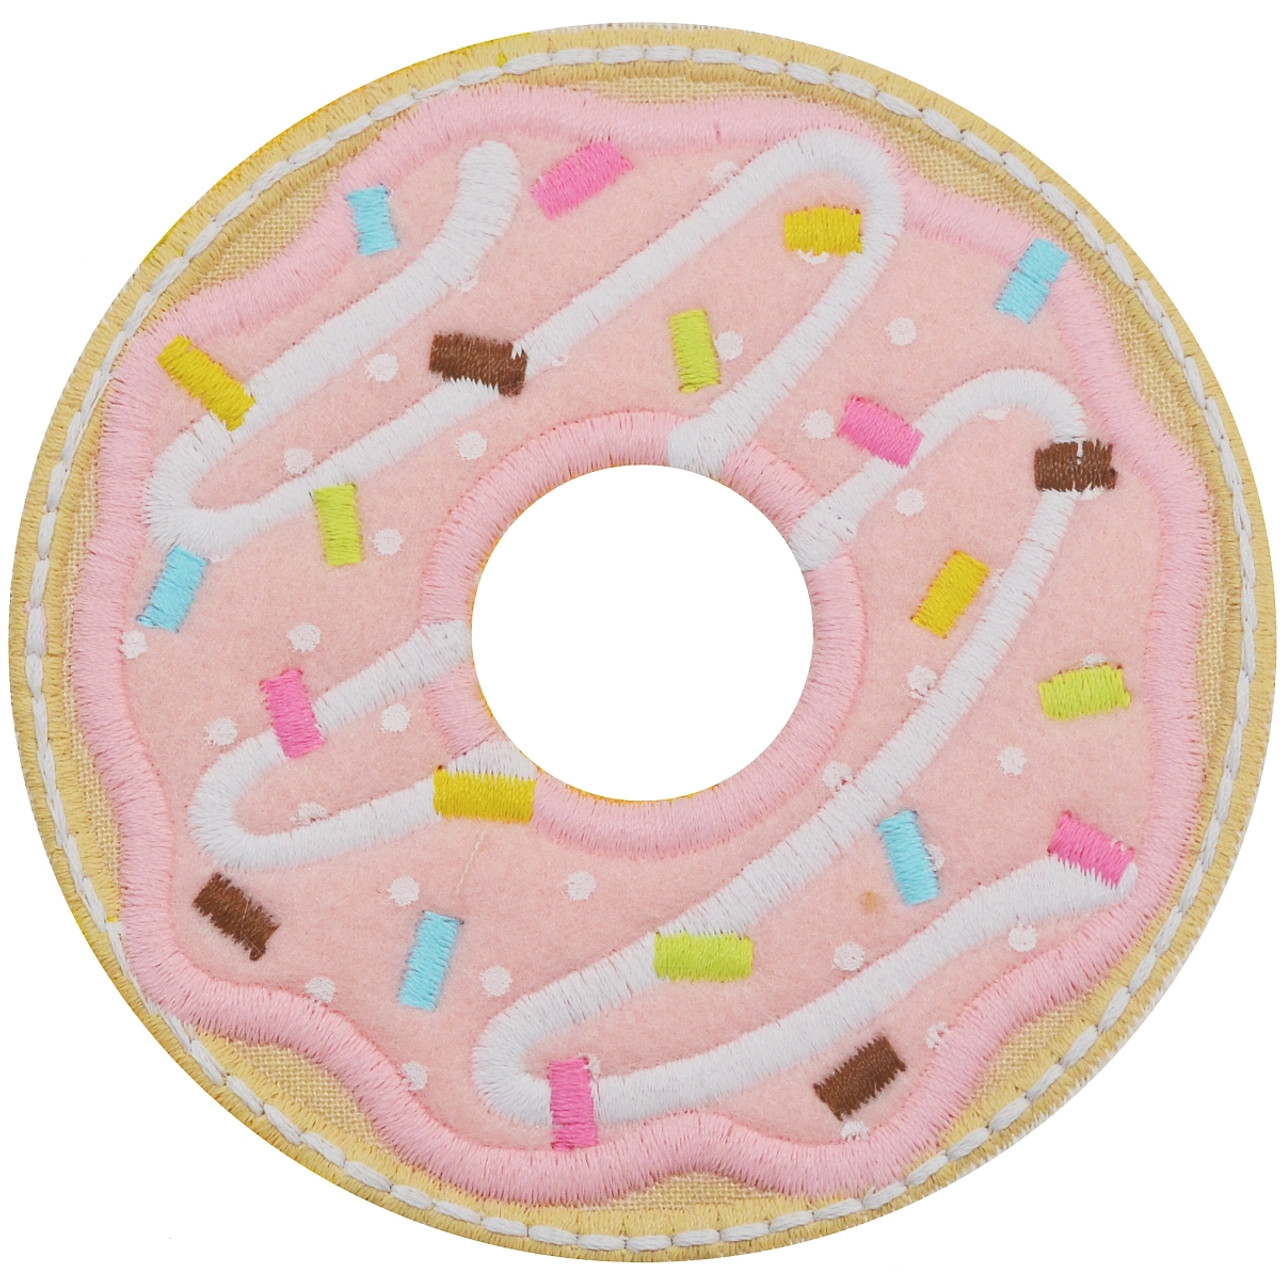 Donut Satin and Zigzag Applique Embroidery Design